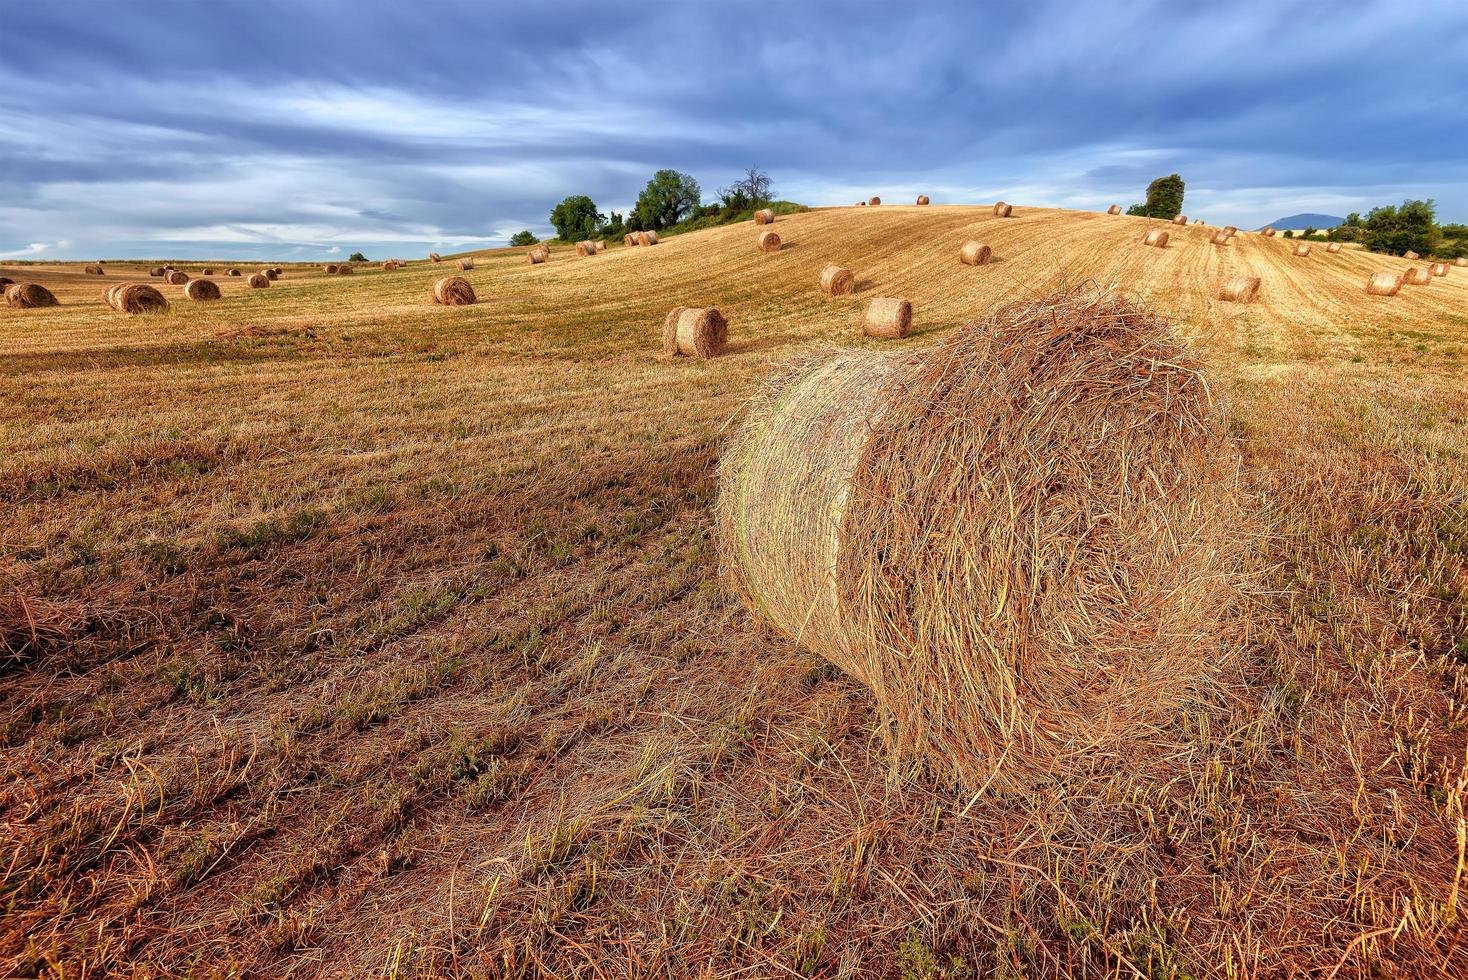 Scenic view of hay bales on harvested wheat field in Provence, south of France against dramatic summer sky photo